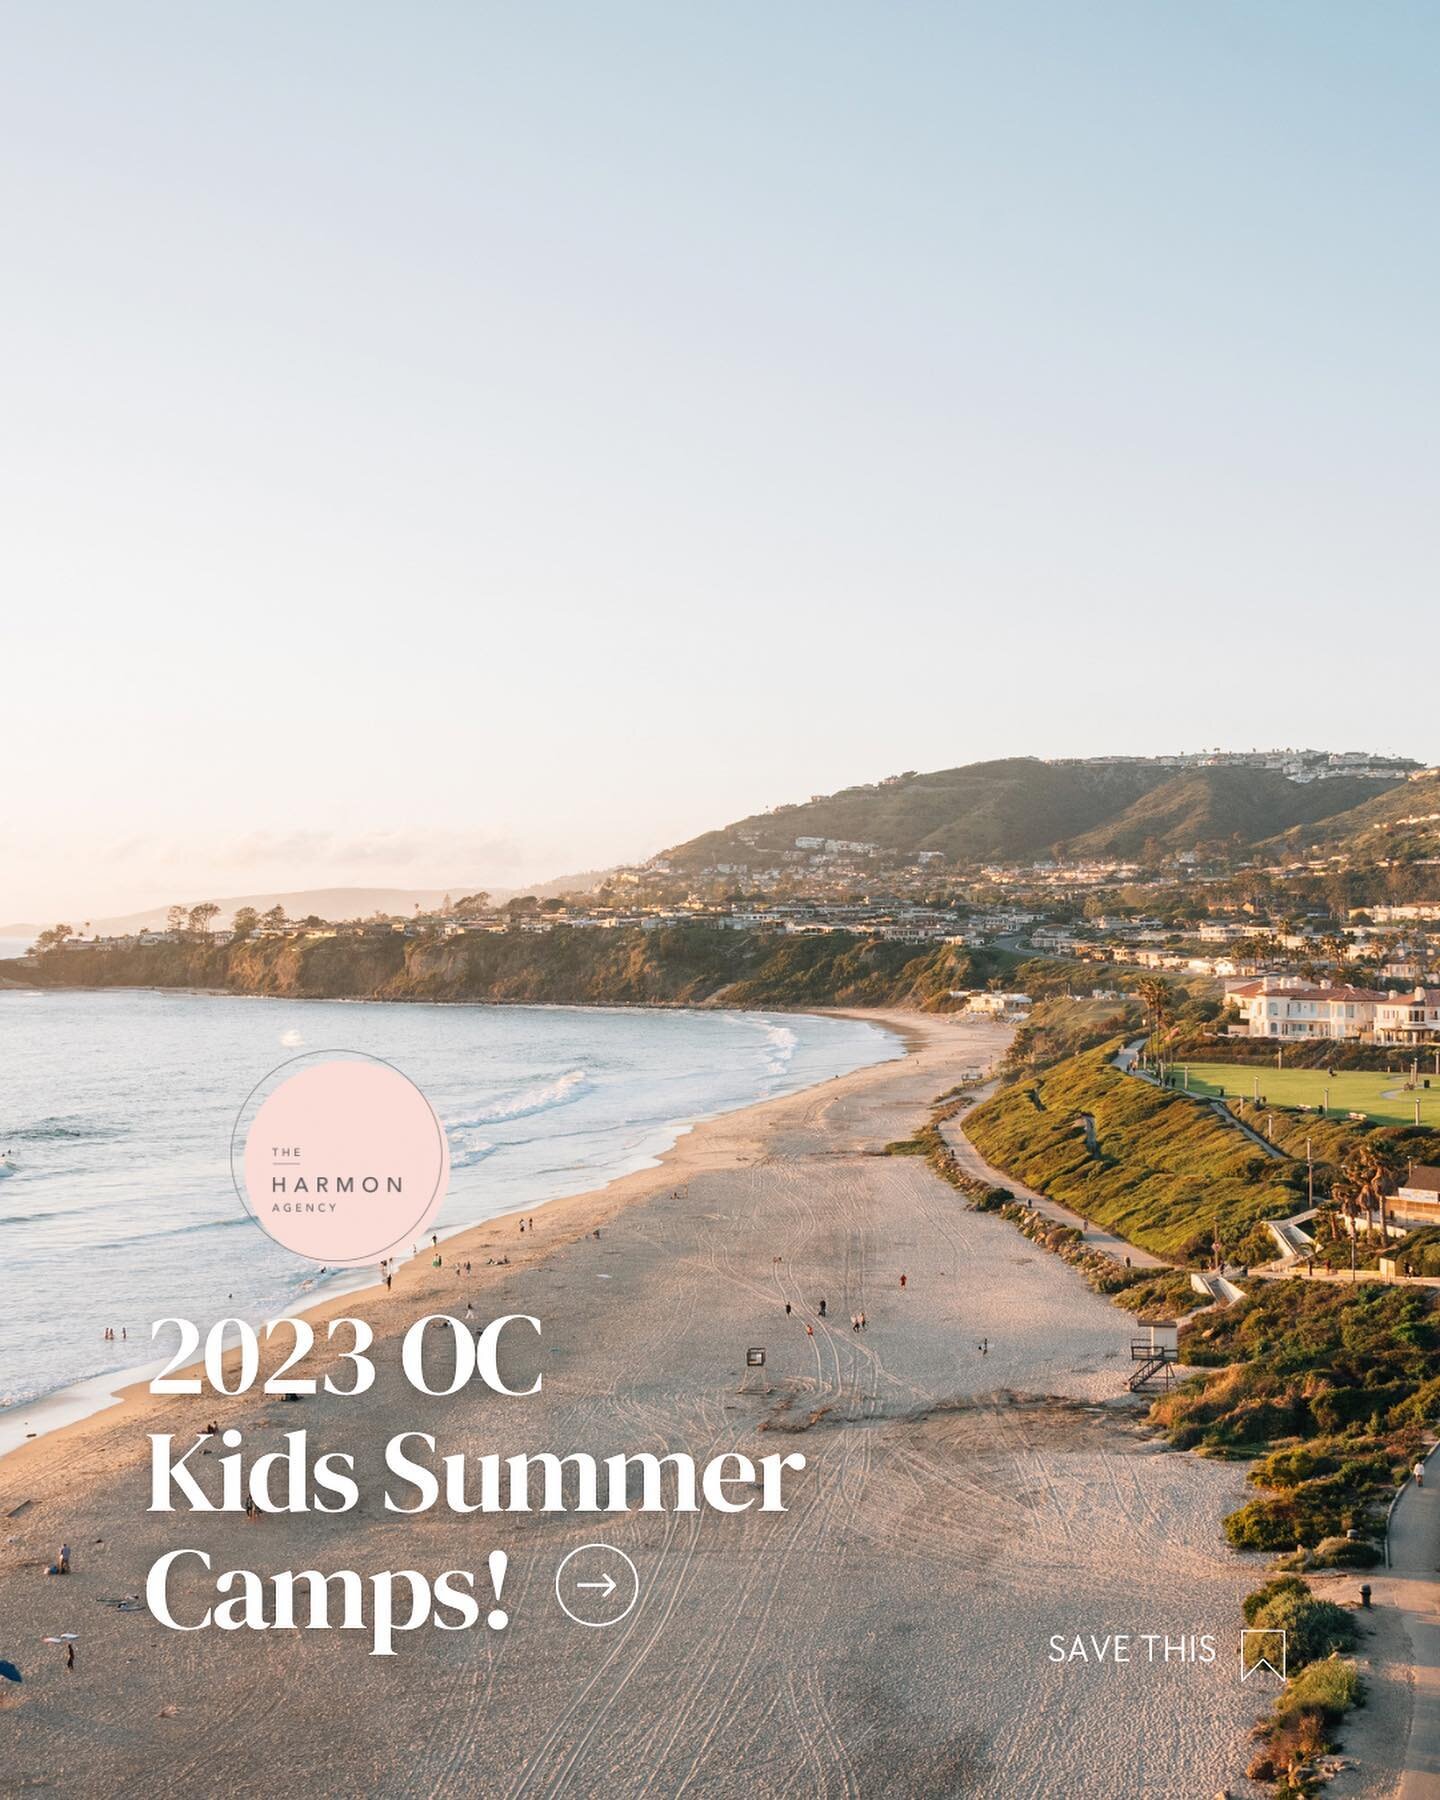 Looking for the perfect summer ☀️ camps for your kids? Look no further than the Harmon agency! We've rounded up our favorites - check them out now ⬆️ #summercamps #familyfun #theharmonagency